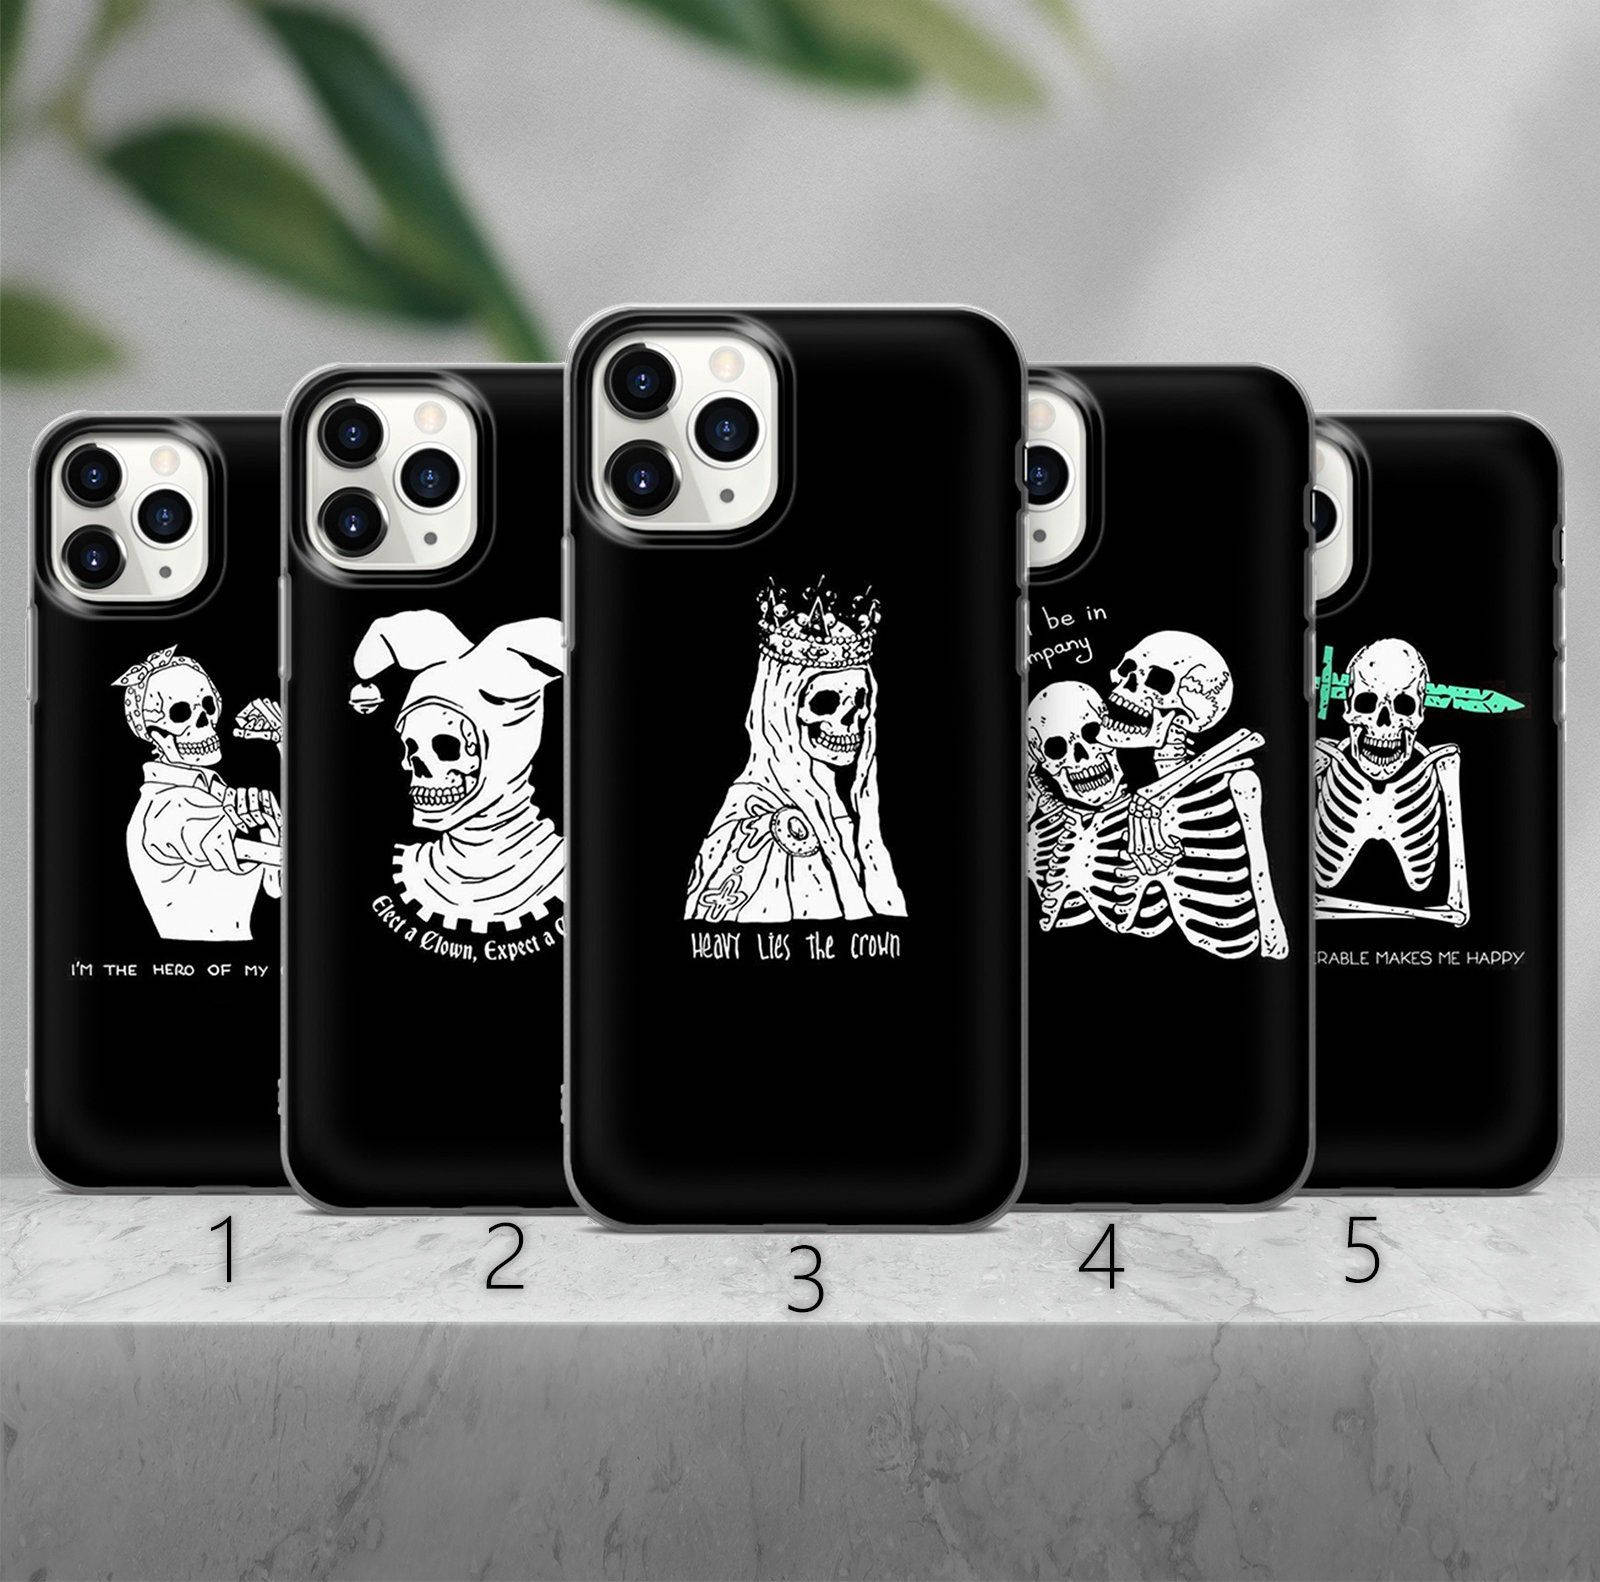 Skeleton Phone Cases For Iphone 11 Pro Wallpaper